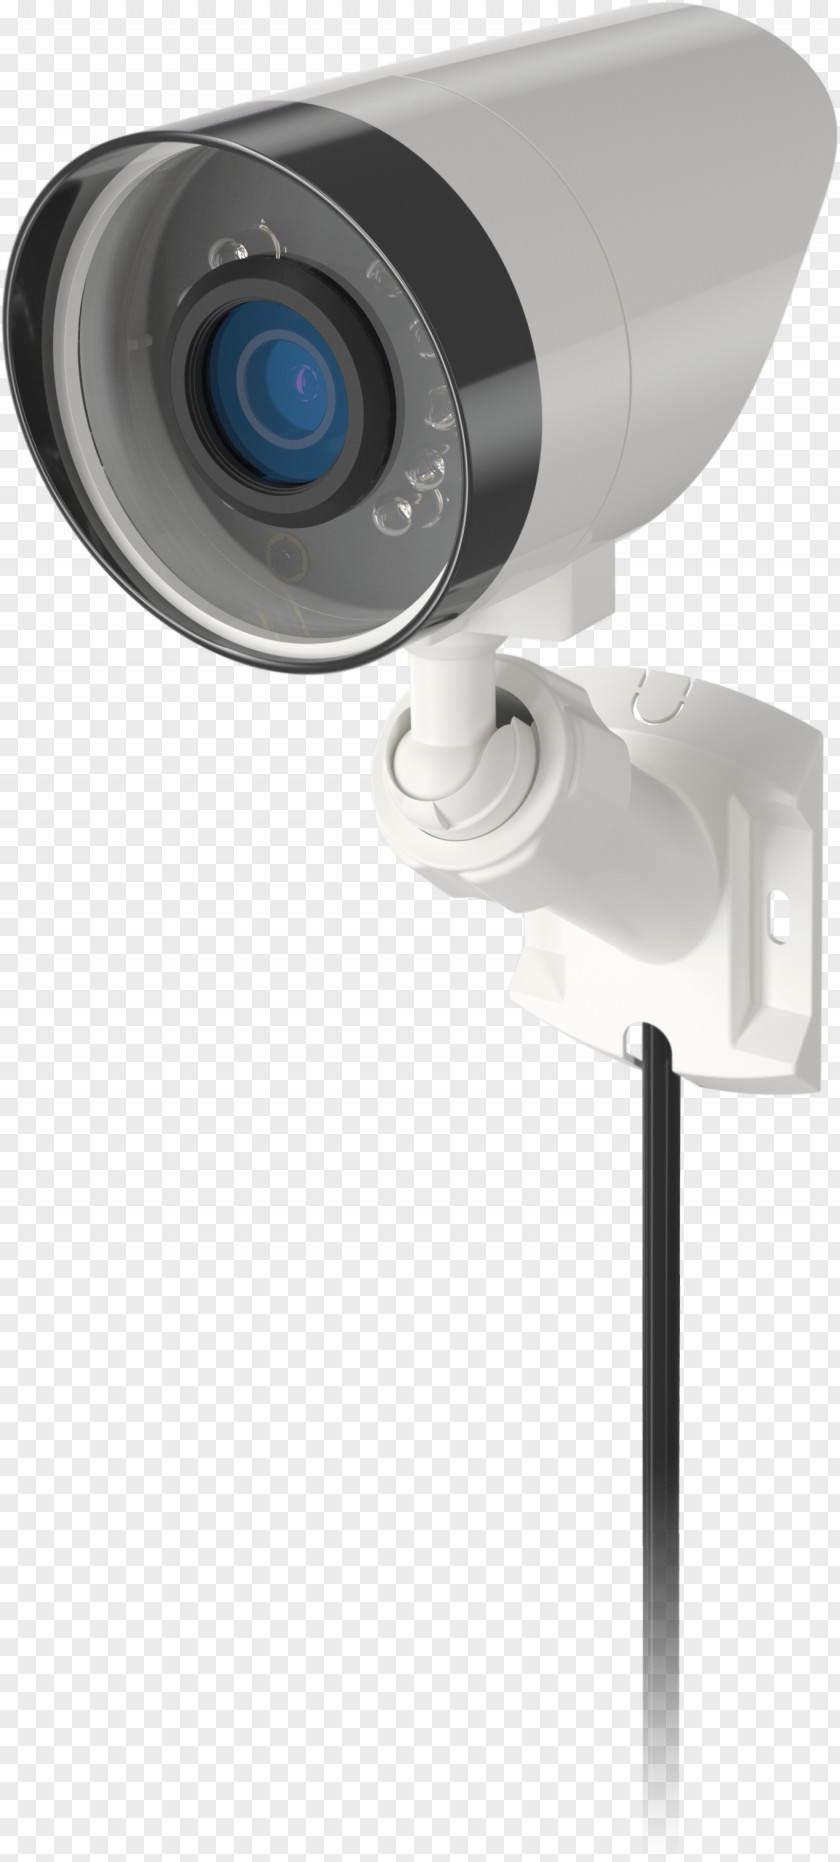 Outdoors Agencies Closed-circuit Television Wi-Fi Wireless Security Camera Surveillance PNG